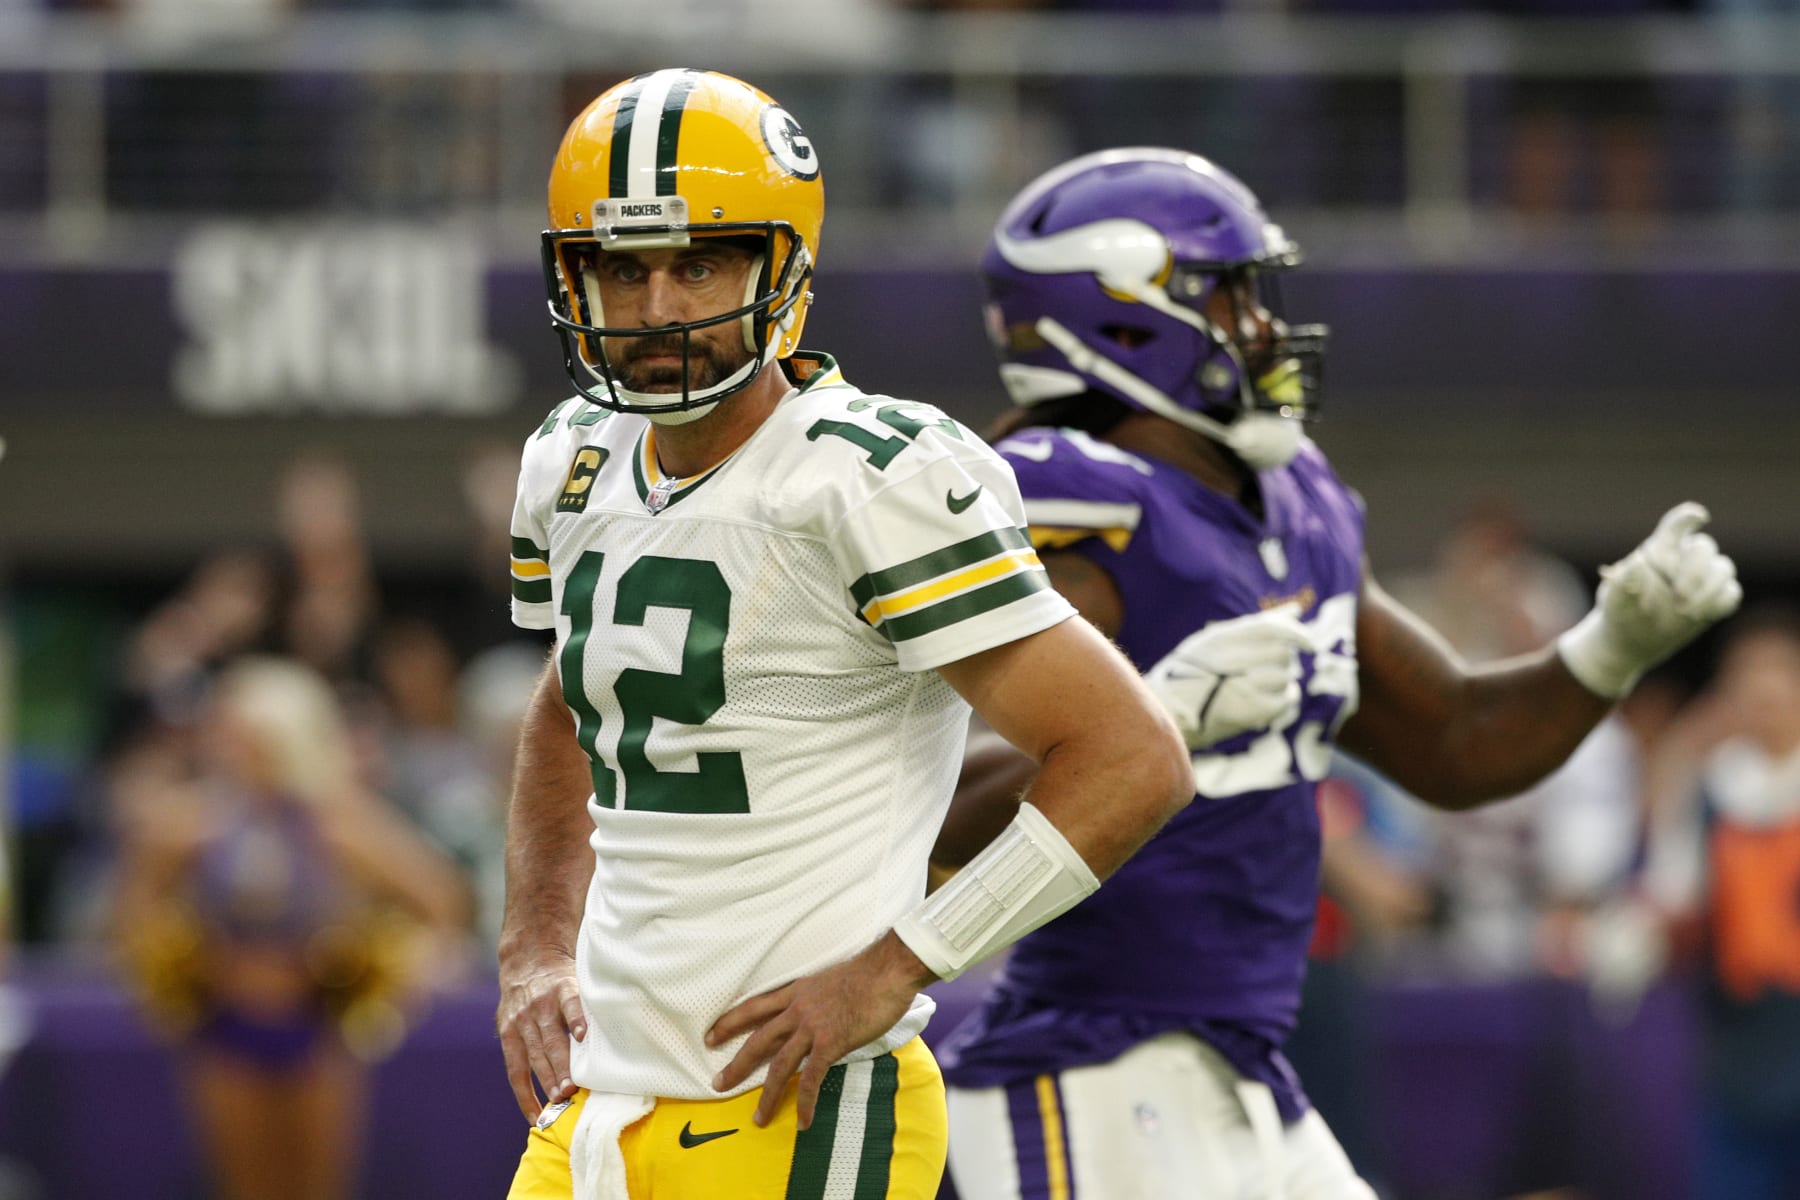 Vikings at Packers score, takeaways: How Green Bay nearly blew a 21-0 lead  but escaped with a win 